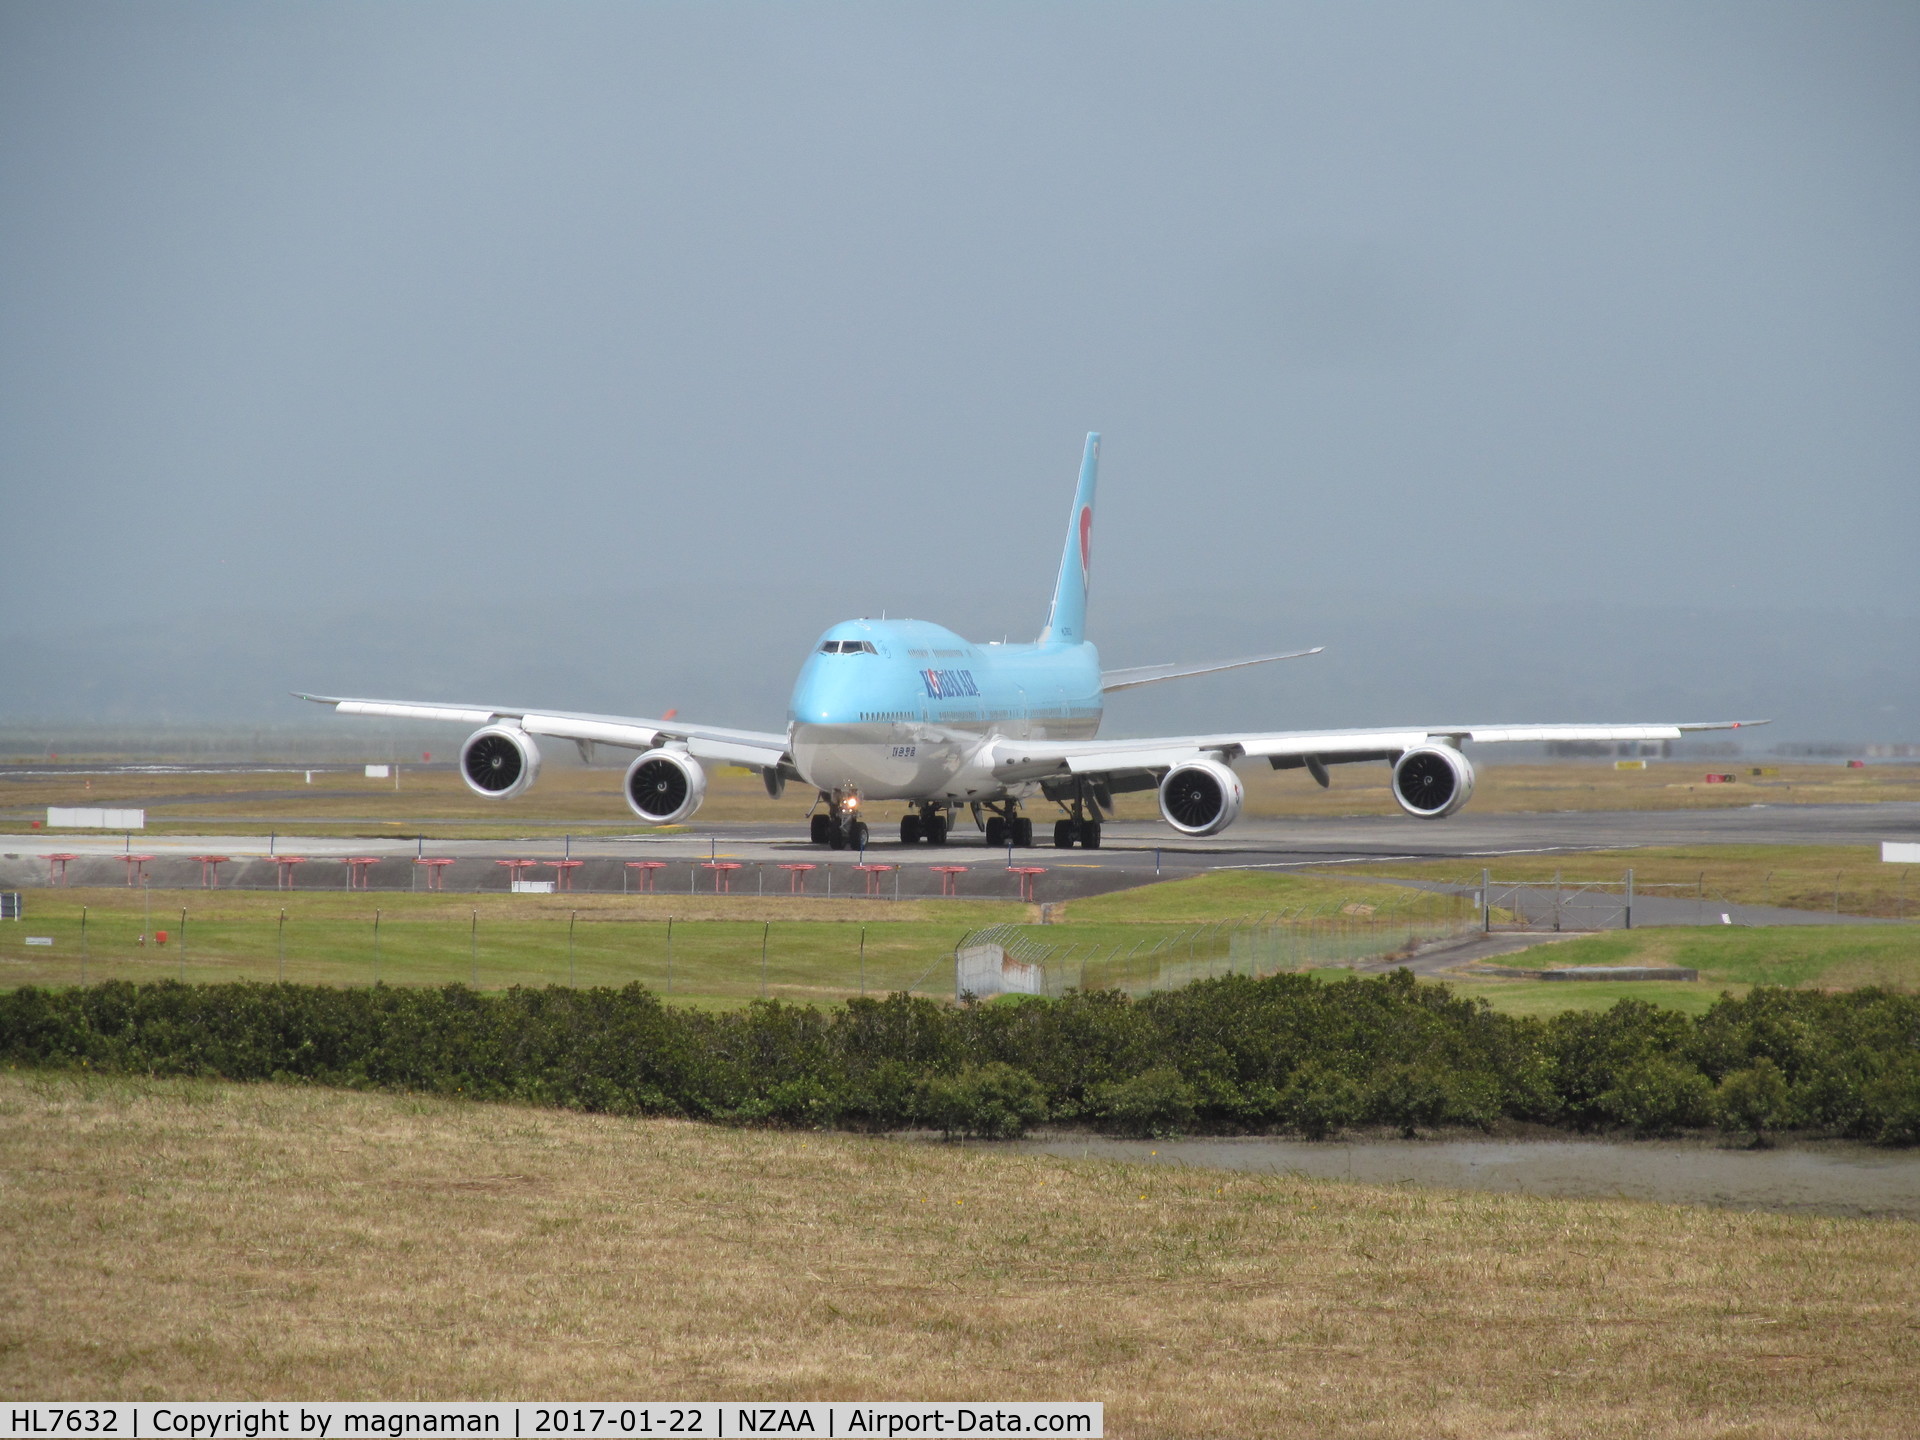 HL7632, 2015 Boeing 747-8B5 C/N 40907, taxying for departure